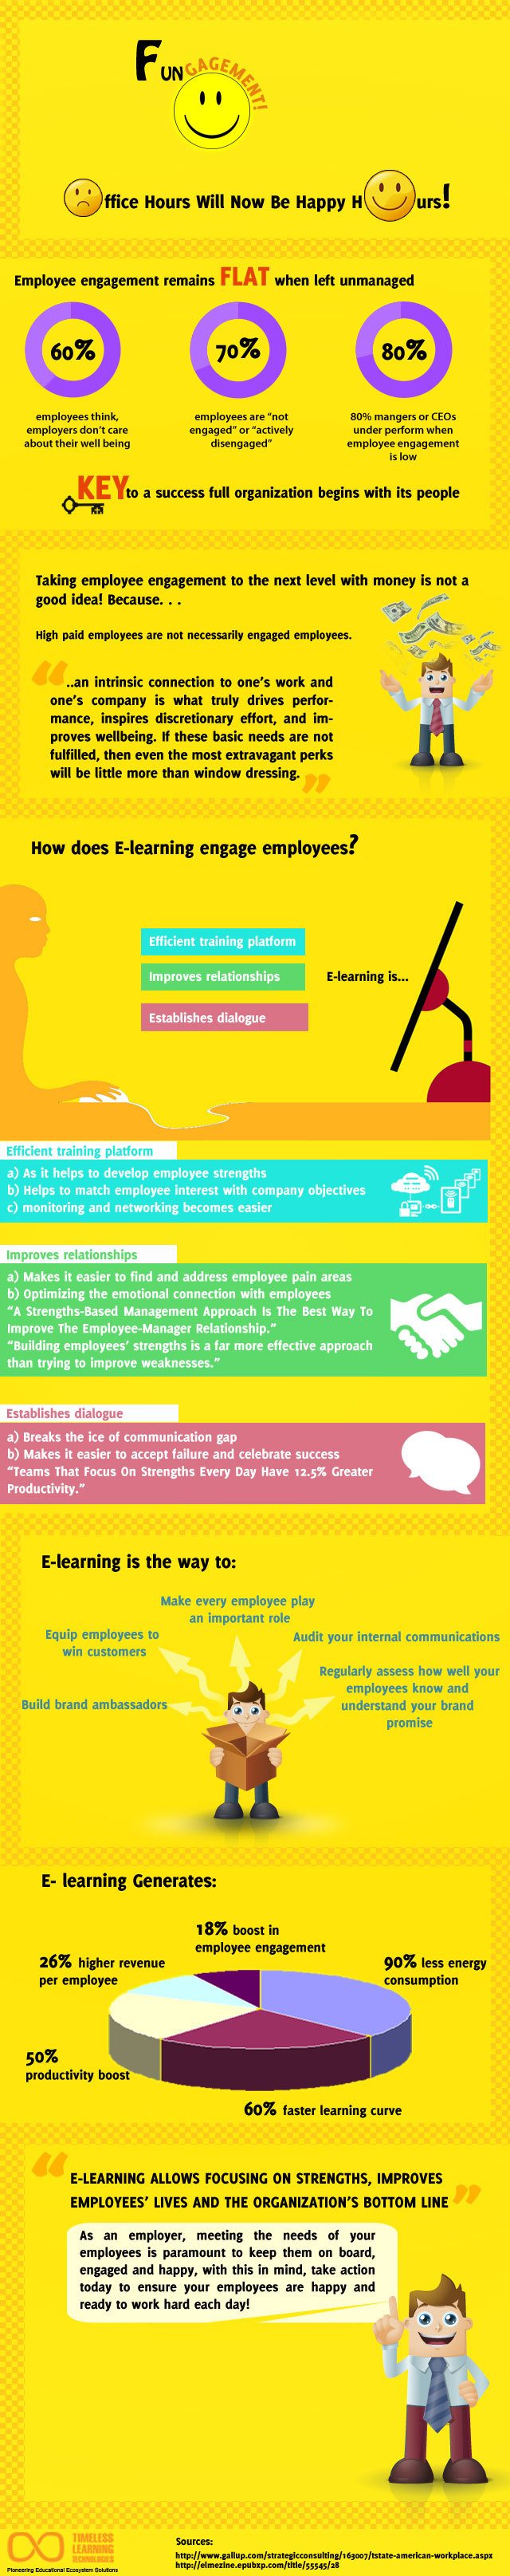 How do you make training fun and engaging? Infographic